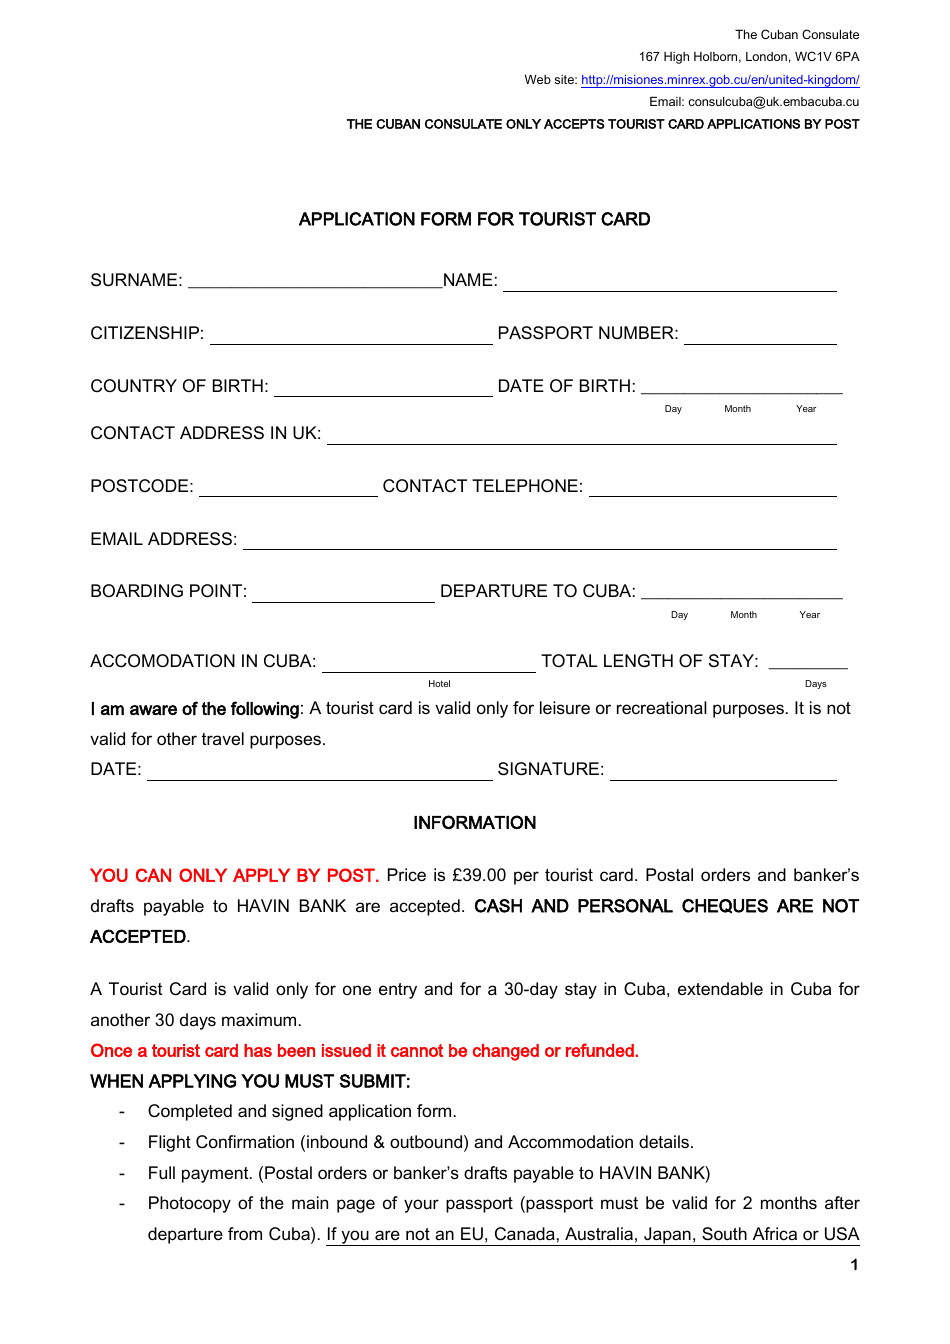 Cuban Tourist Card Application Form - the Cuban Consulate - Greater London, United Kingdom, Page 1